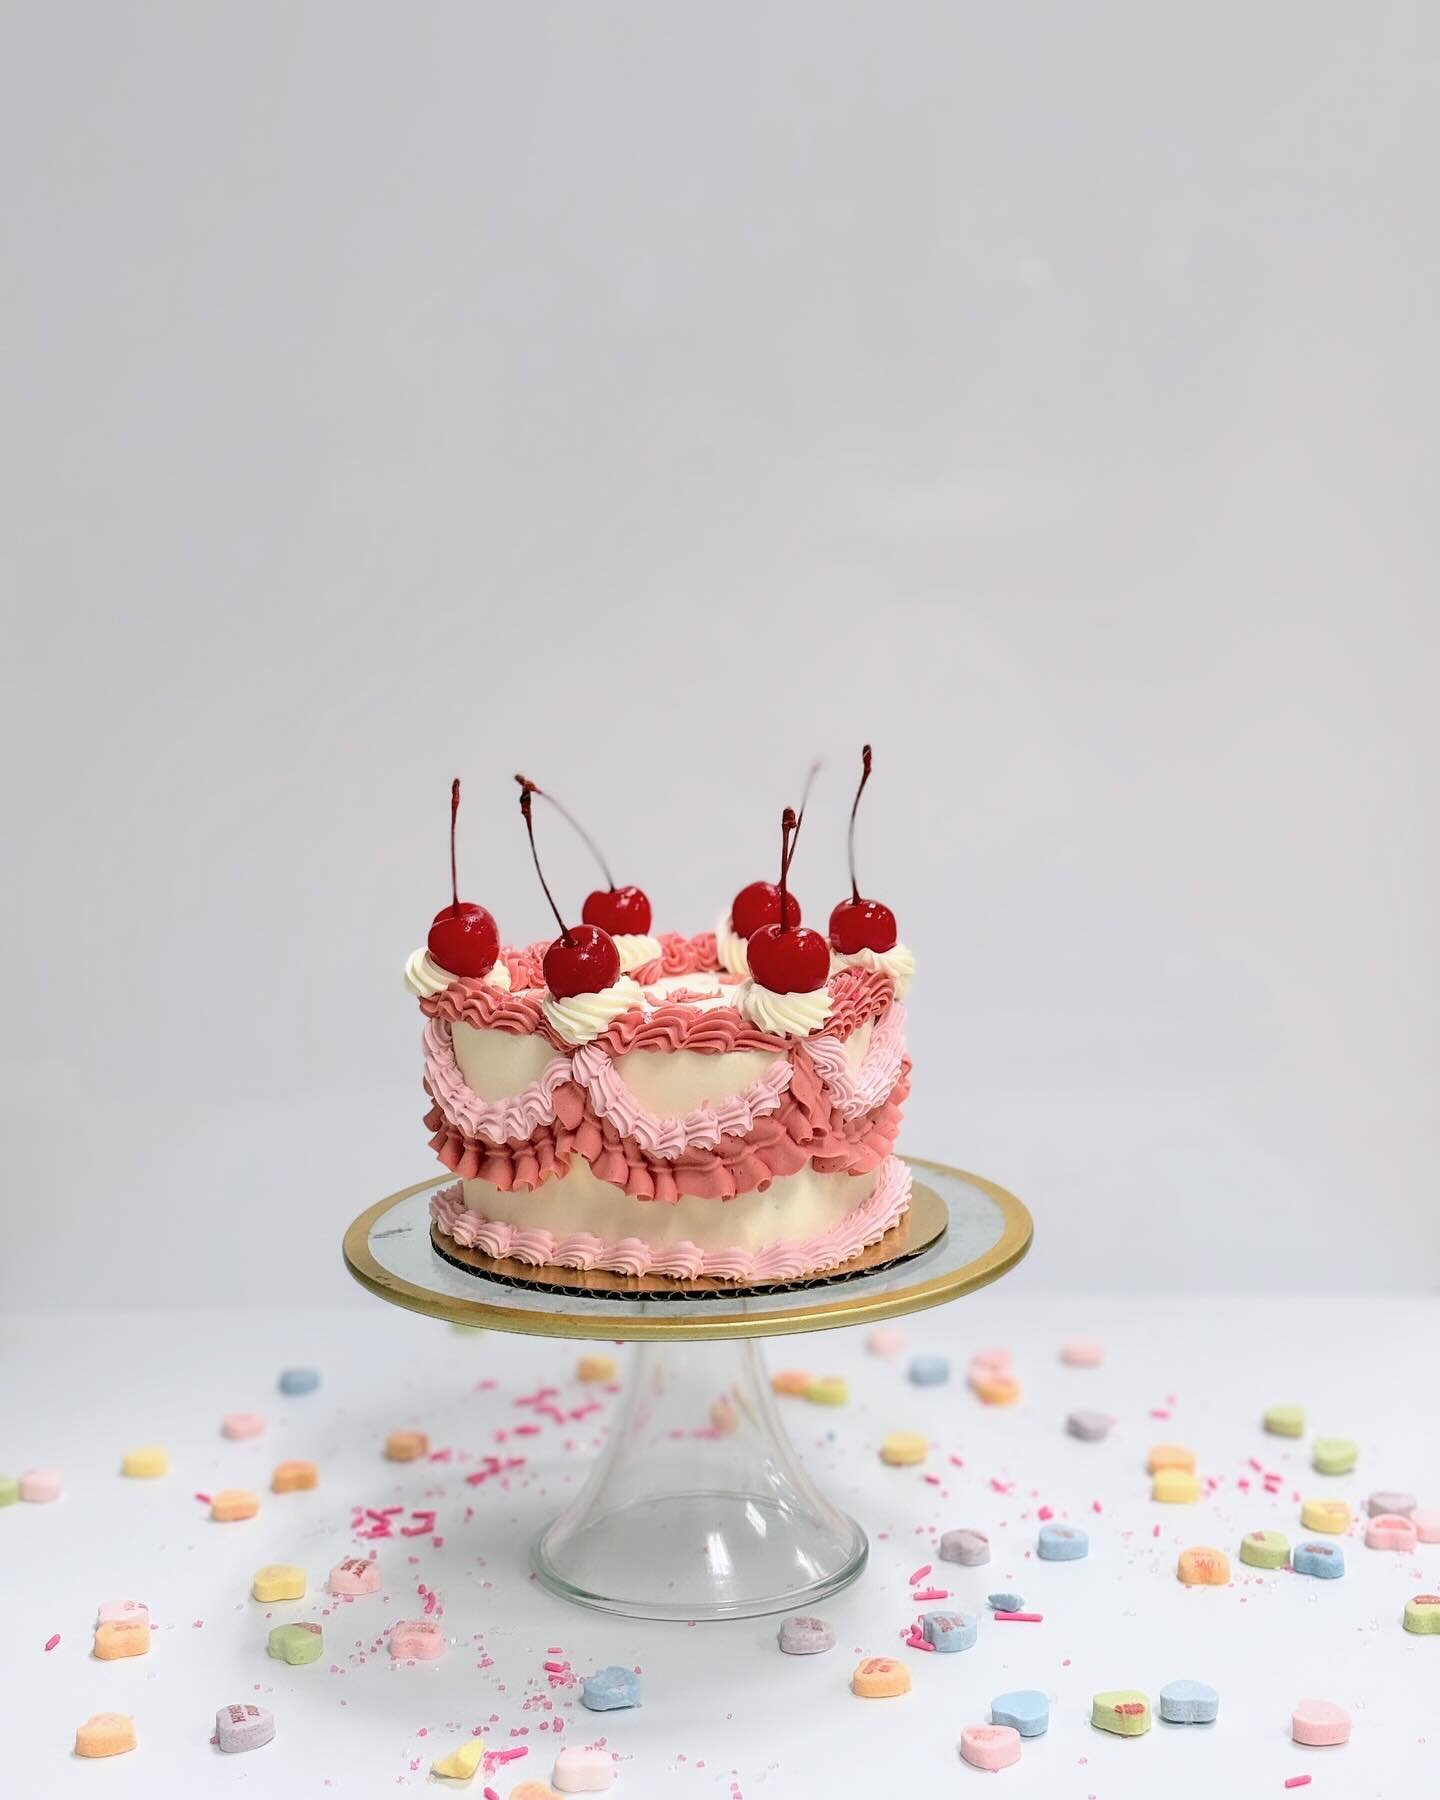 Whether with a pal, partner or on your own, this cake is perfect for sharing (or not!). Available now in our online shop! Swipe for the matching ruffled cupcakes 🩷